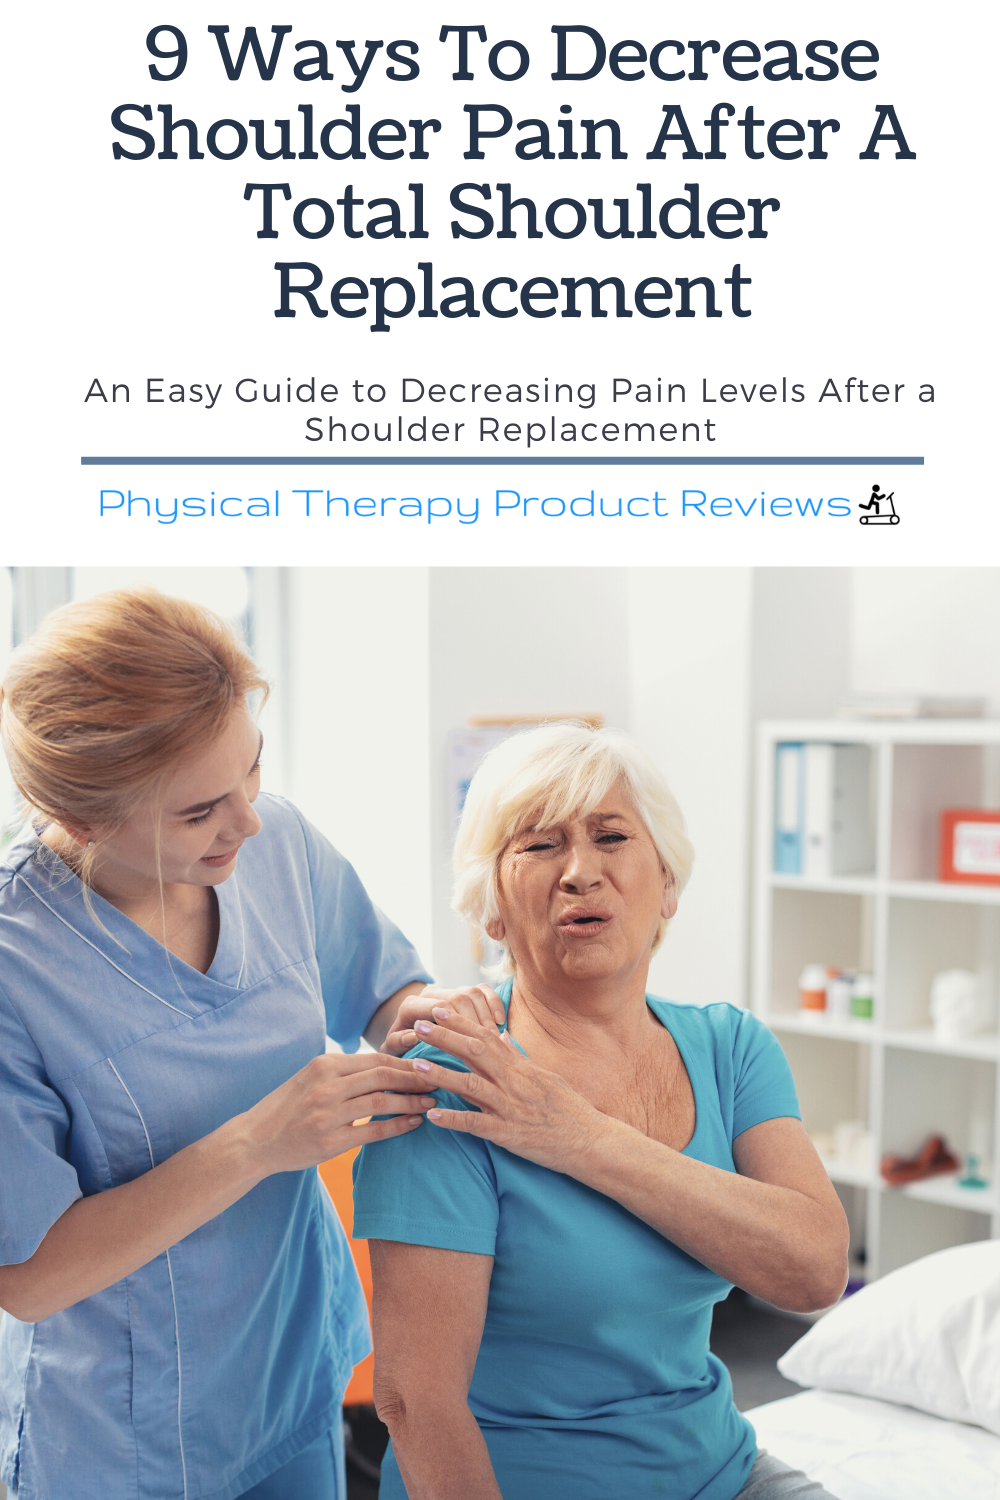 9 Ways To Decrease Shoulder Pain After A Total Shoulder Replacement 